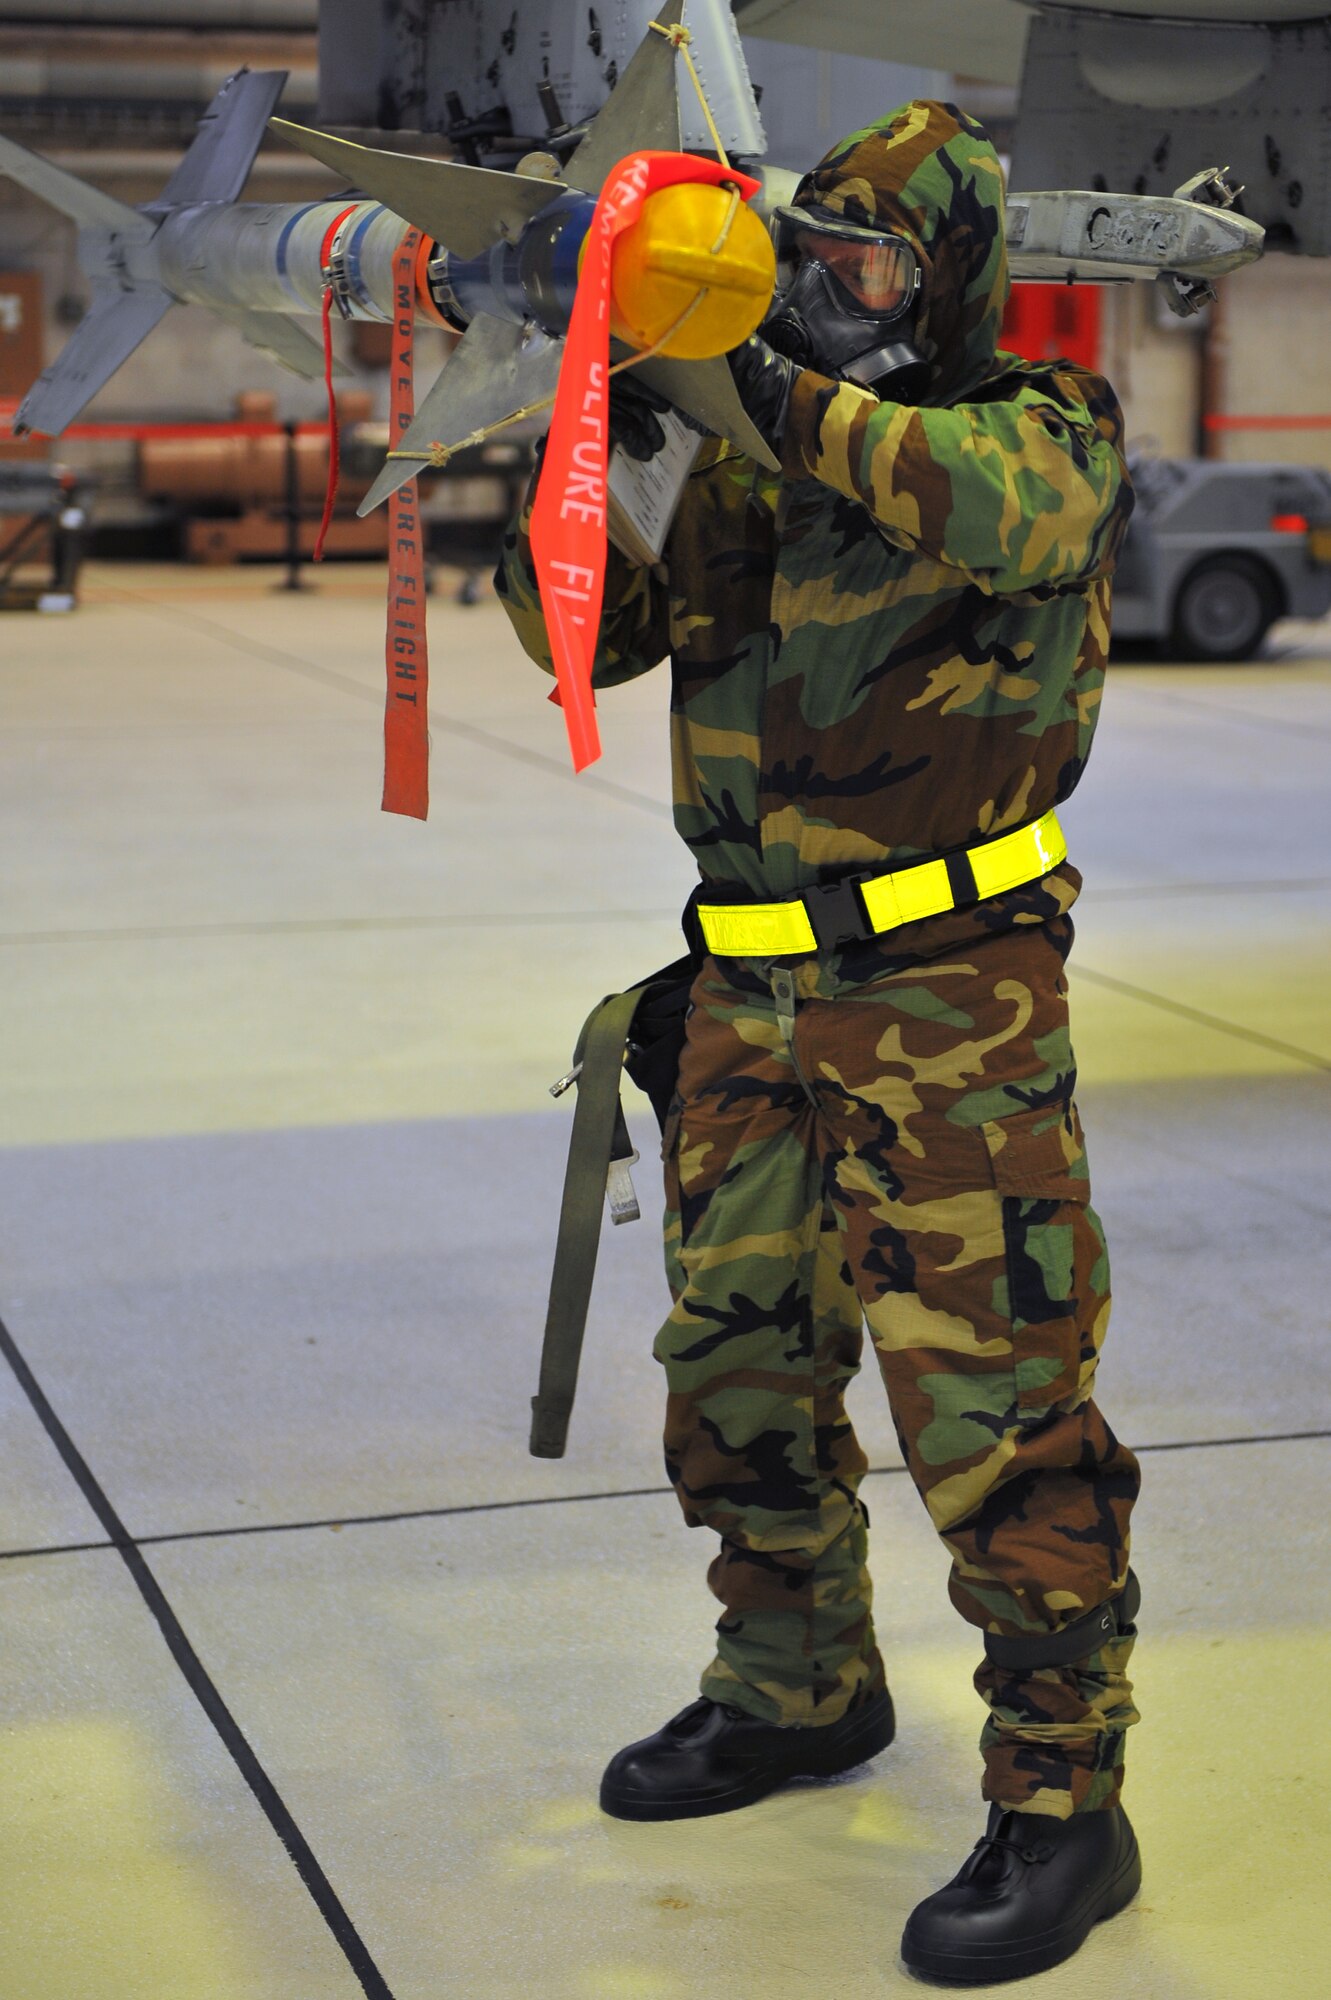 SPANGDAHLEM AIR BASE, Germany – Staff Sgt. Paul Garton, 52nd Aircraft Maintenance Squadron load-crew chief, secures an AIM-9 missile to the wing of an A-10 Thunderbolt II during a munitions-loading evaluation here Nov. 29. The evaluation ensures load-crew members and team chiefs retain their qualification to load all munitions and are ready for mission taskings. Crew members complete an evaluation every month and are required to be evaluated annually while wearing chemical-warfare gear. (U.S. Air Force photo/Airman 1st Class Dillon Davis)